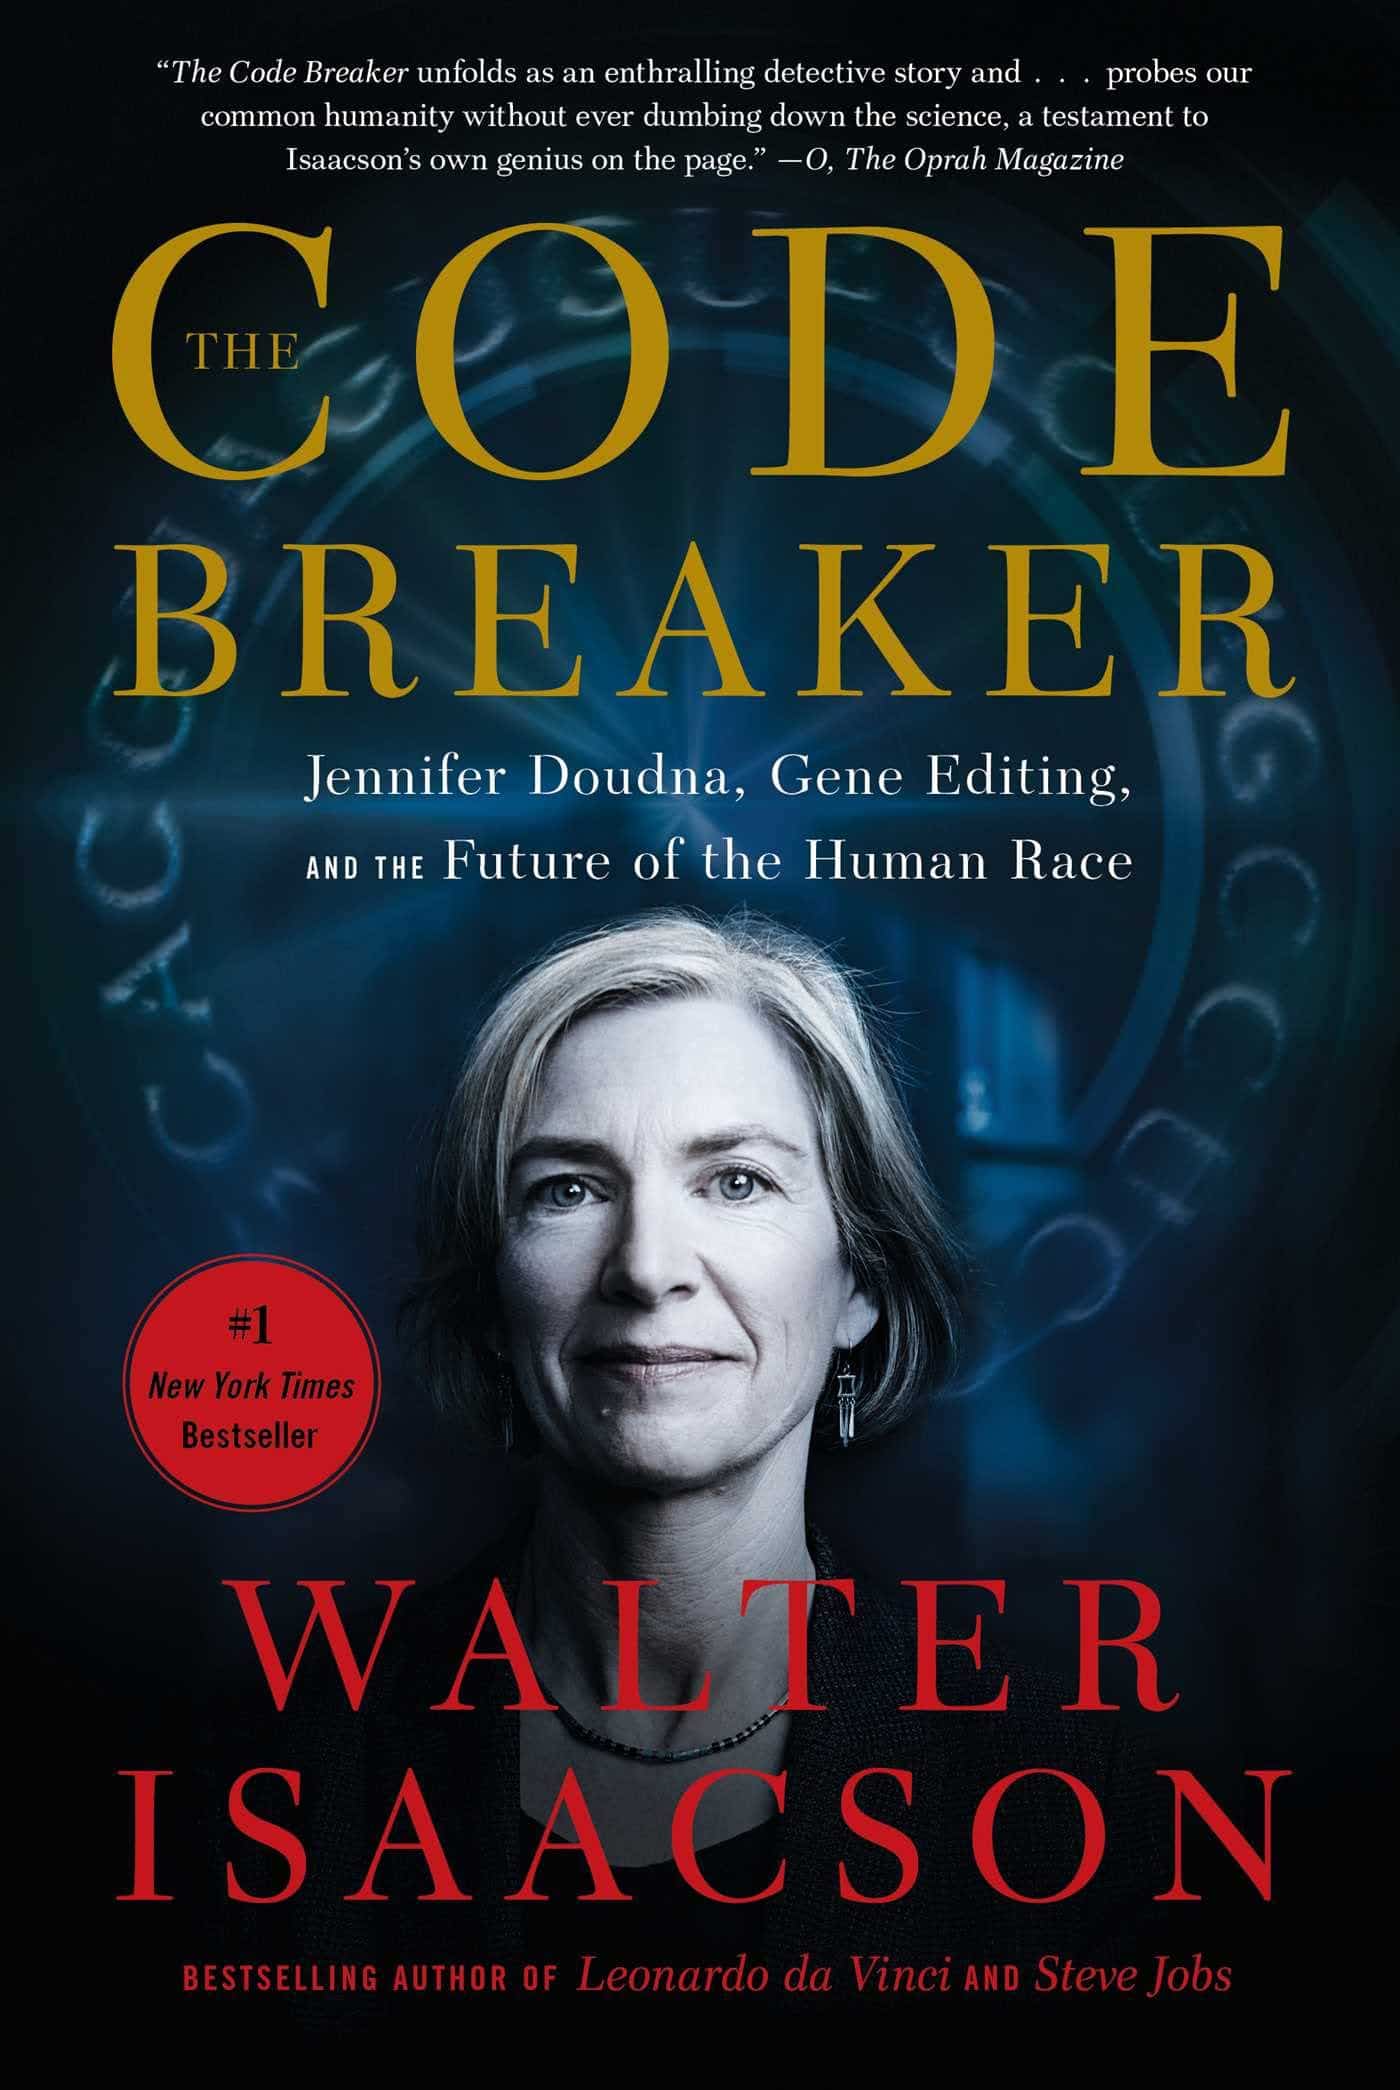 The cover of The Code Breaker